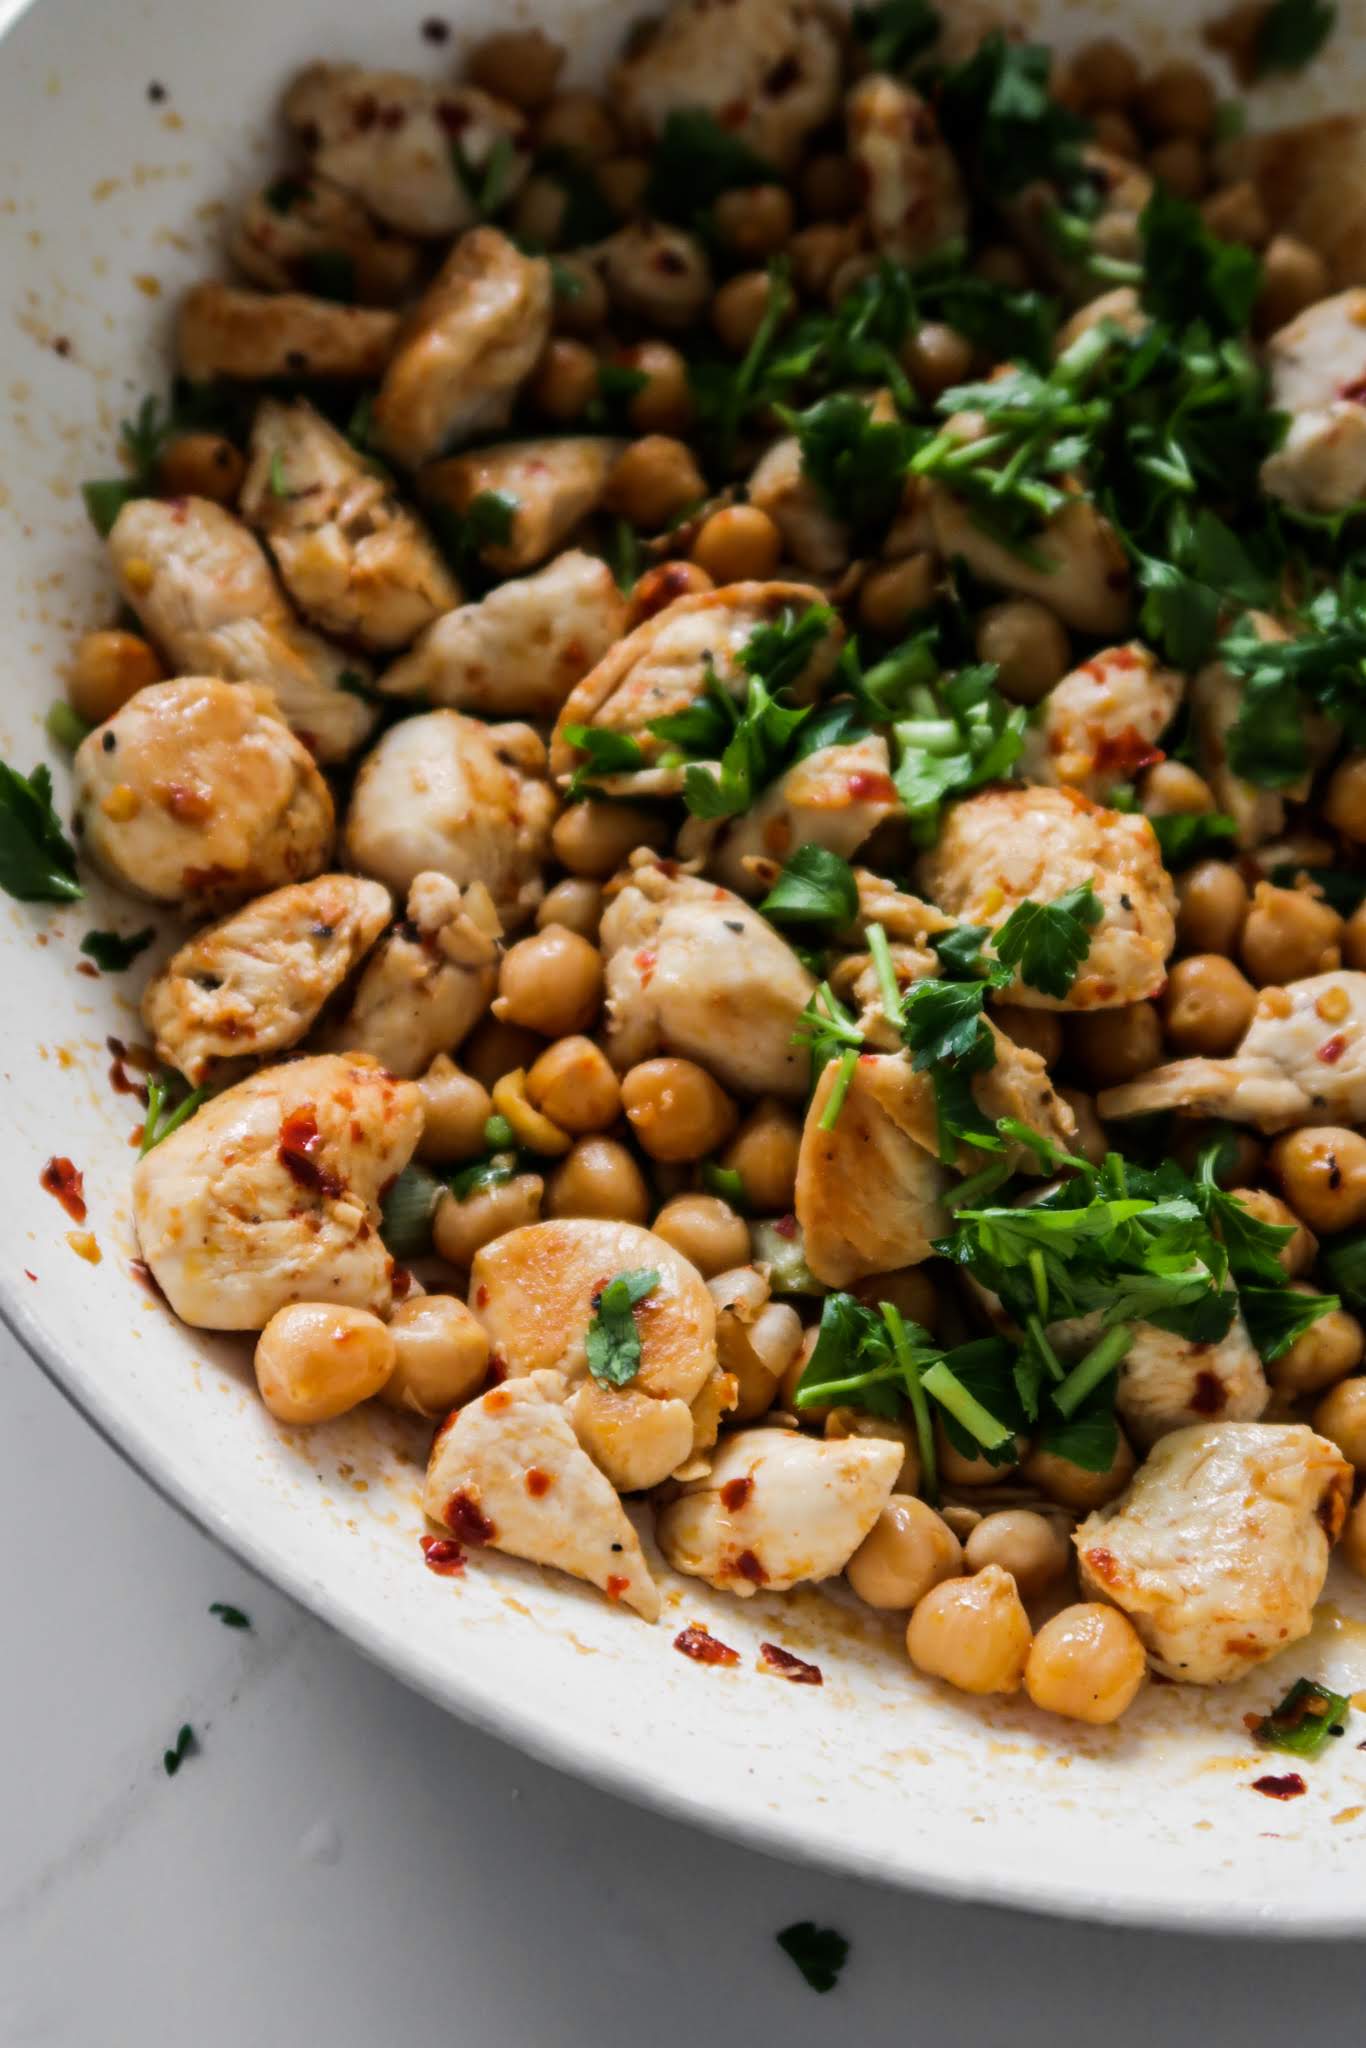 15-Minute Spicy Chicken and Chickpeas! Forget about chicken and rice, forget about chicken and broccoli (if you’re doing it to lose weight!) too! This easy healthy chicken recipe is the perfect dinner - it’s delicious, it’s spicy and you only one pan. Also it’s a very versatile and easy meal prep recipe that you can make in about 15 minutes. Pair with some fresh salad on the side and tzatziki or hummus and you’ve got yourself a tasty and healthy Mediterranean diet dinner in no time.